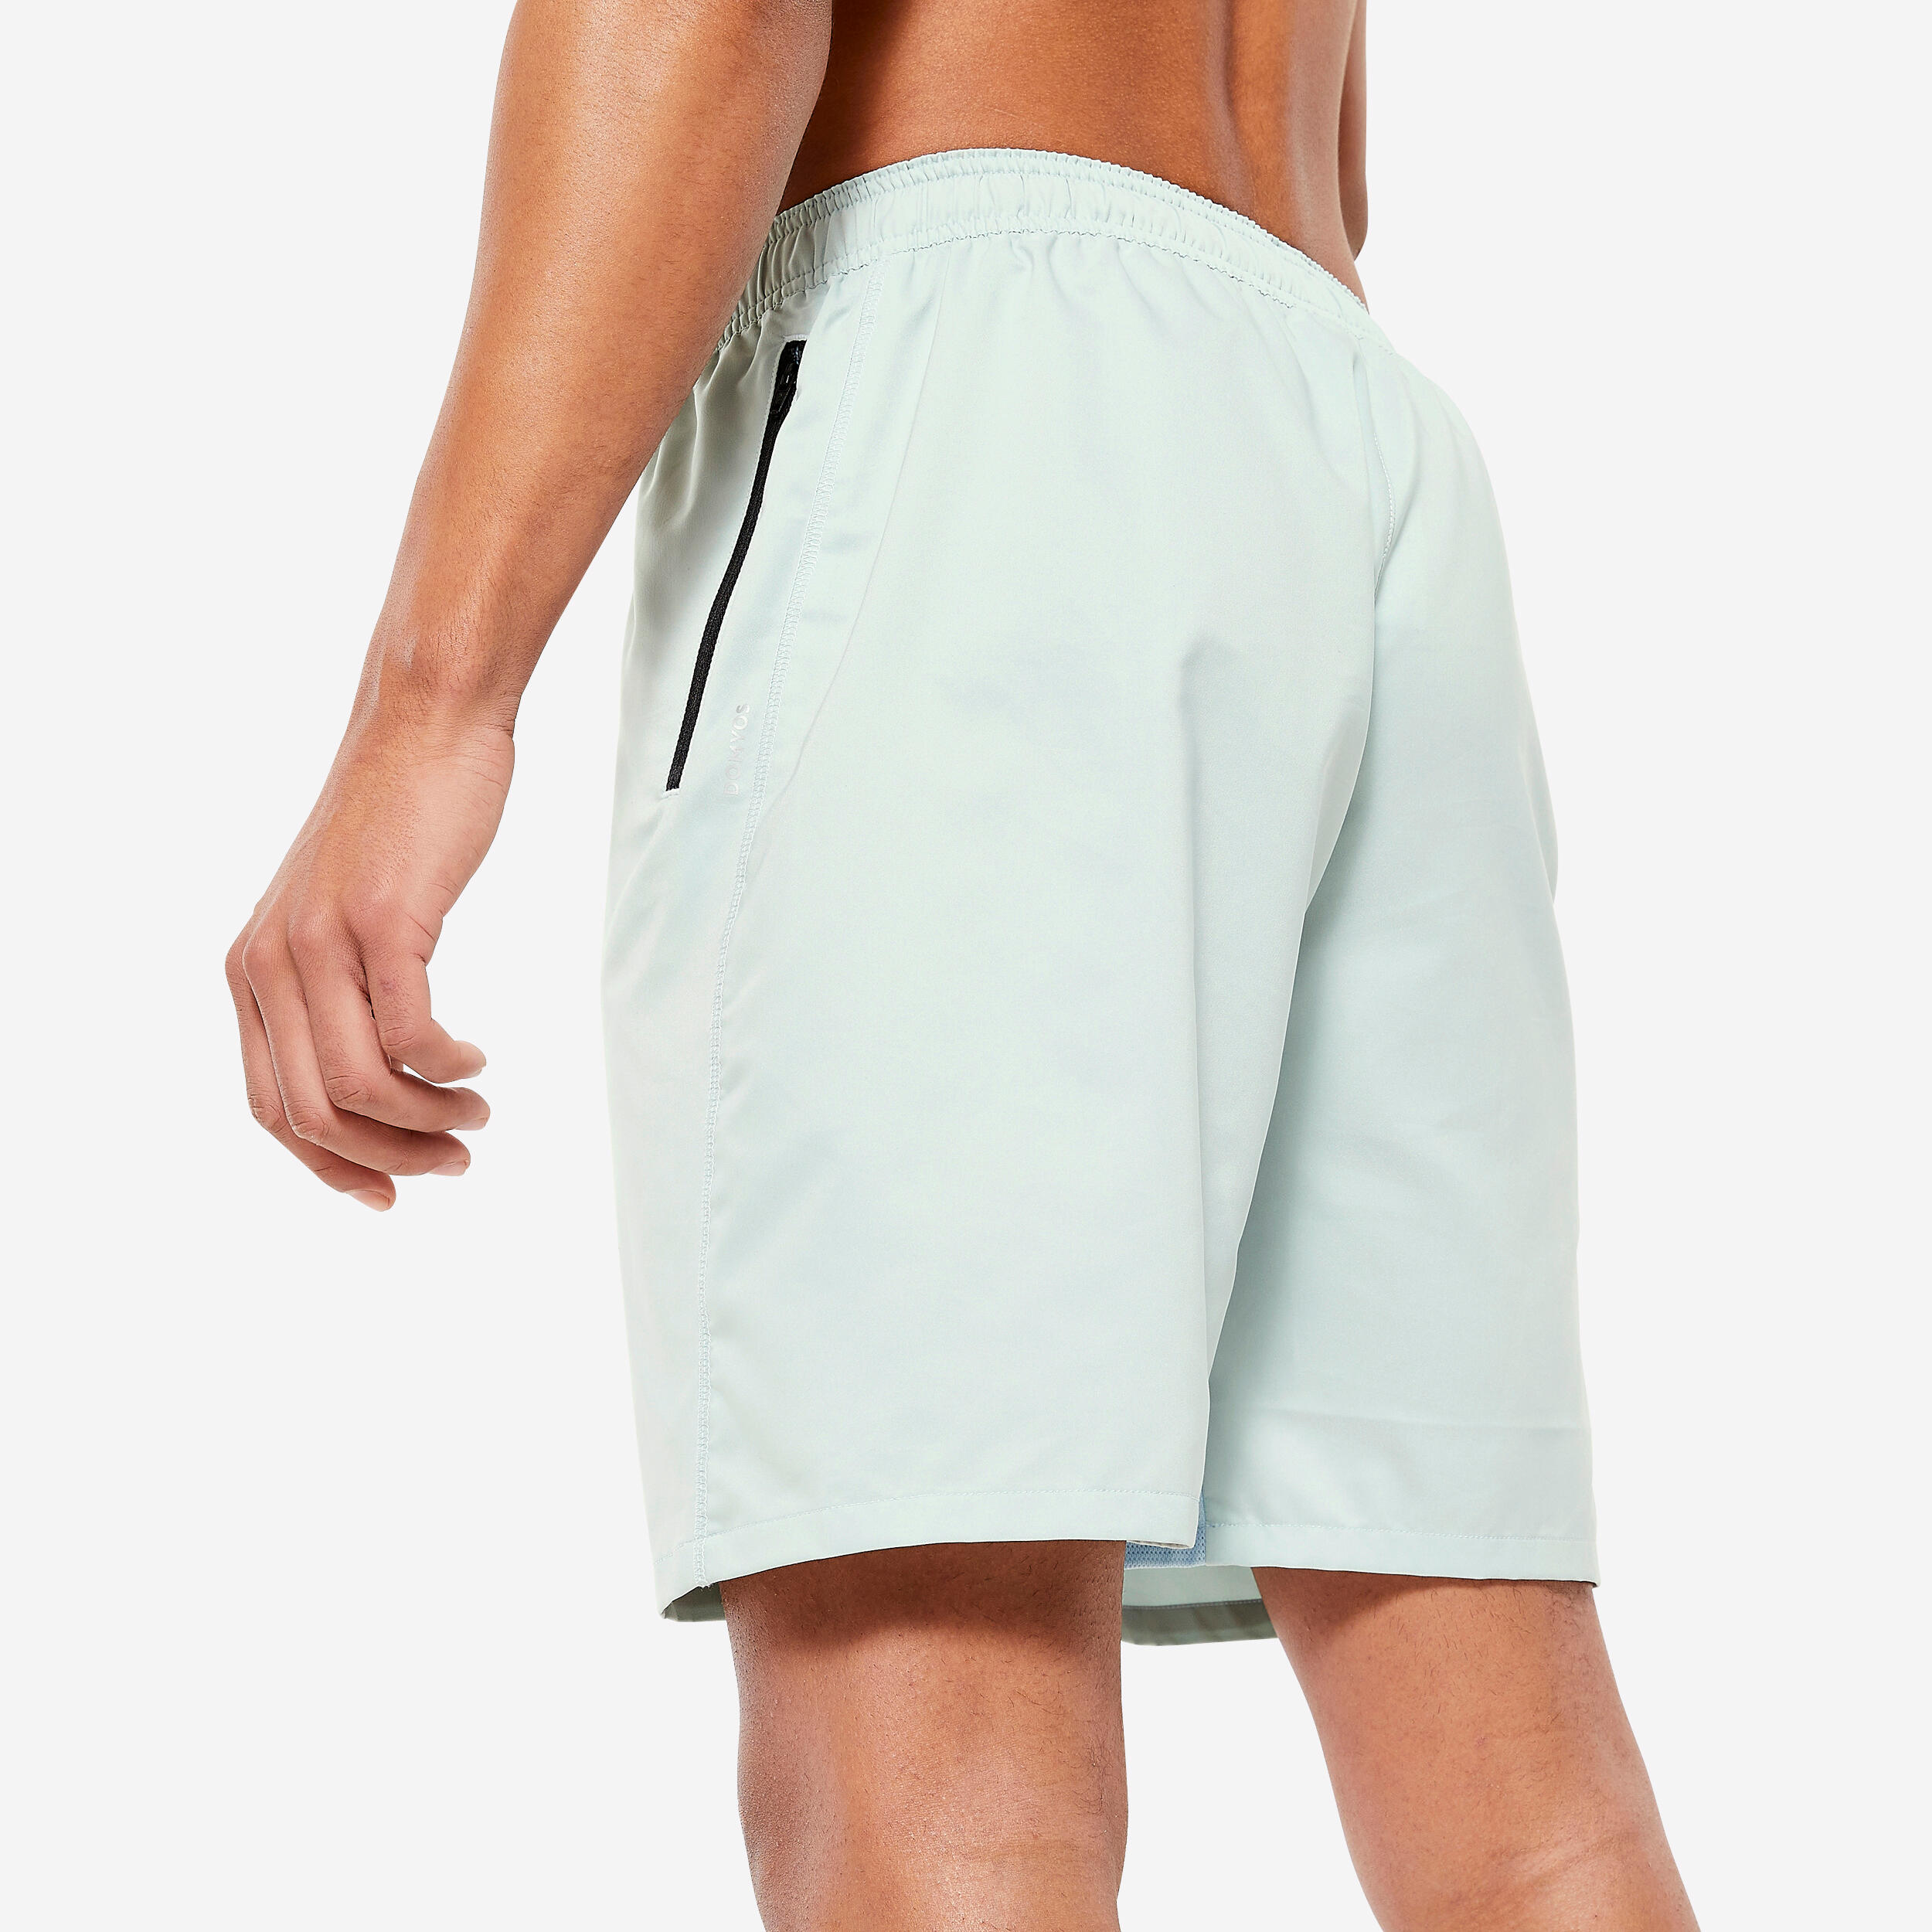 Men's Breathable Essential Fitness Shorts with Zipped Pockets - Green 5/6